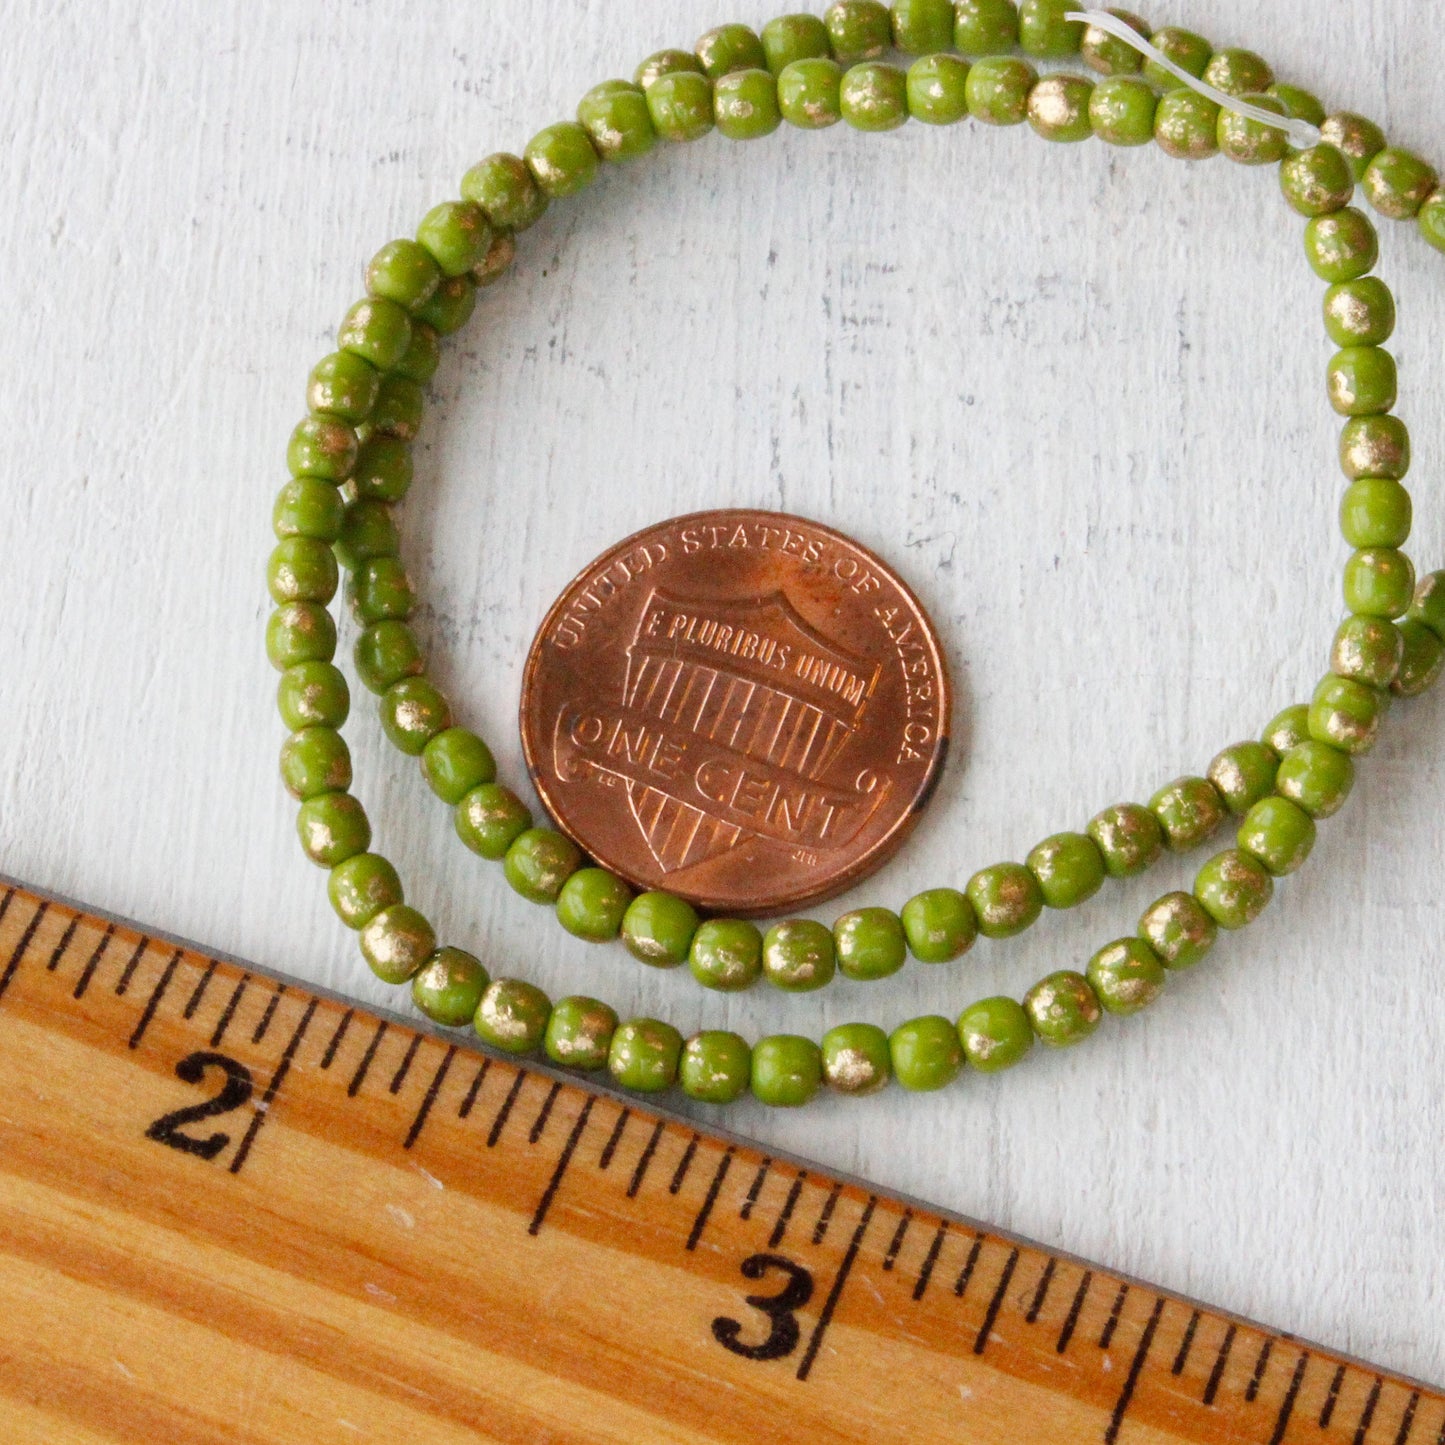 3mm Round Glass Beads - Avocado Green with Gold Flakes - 100 Beads